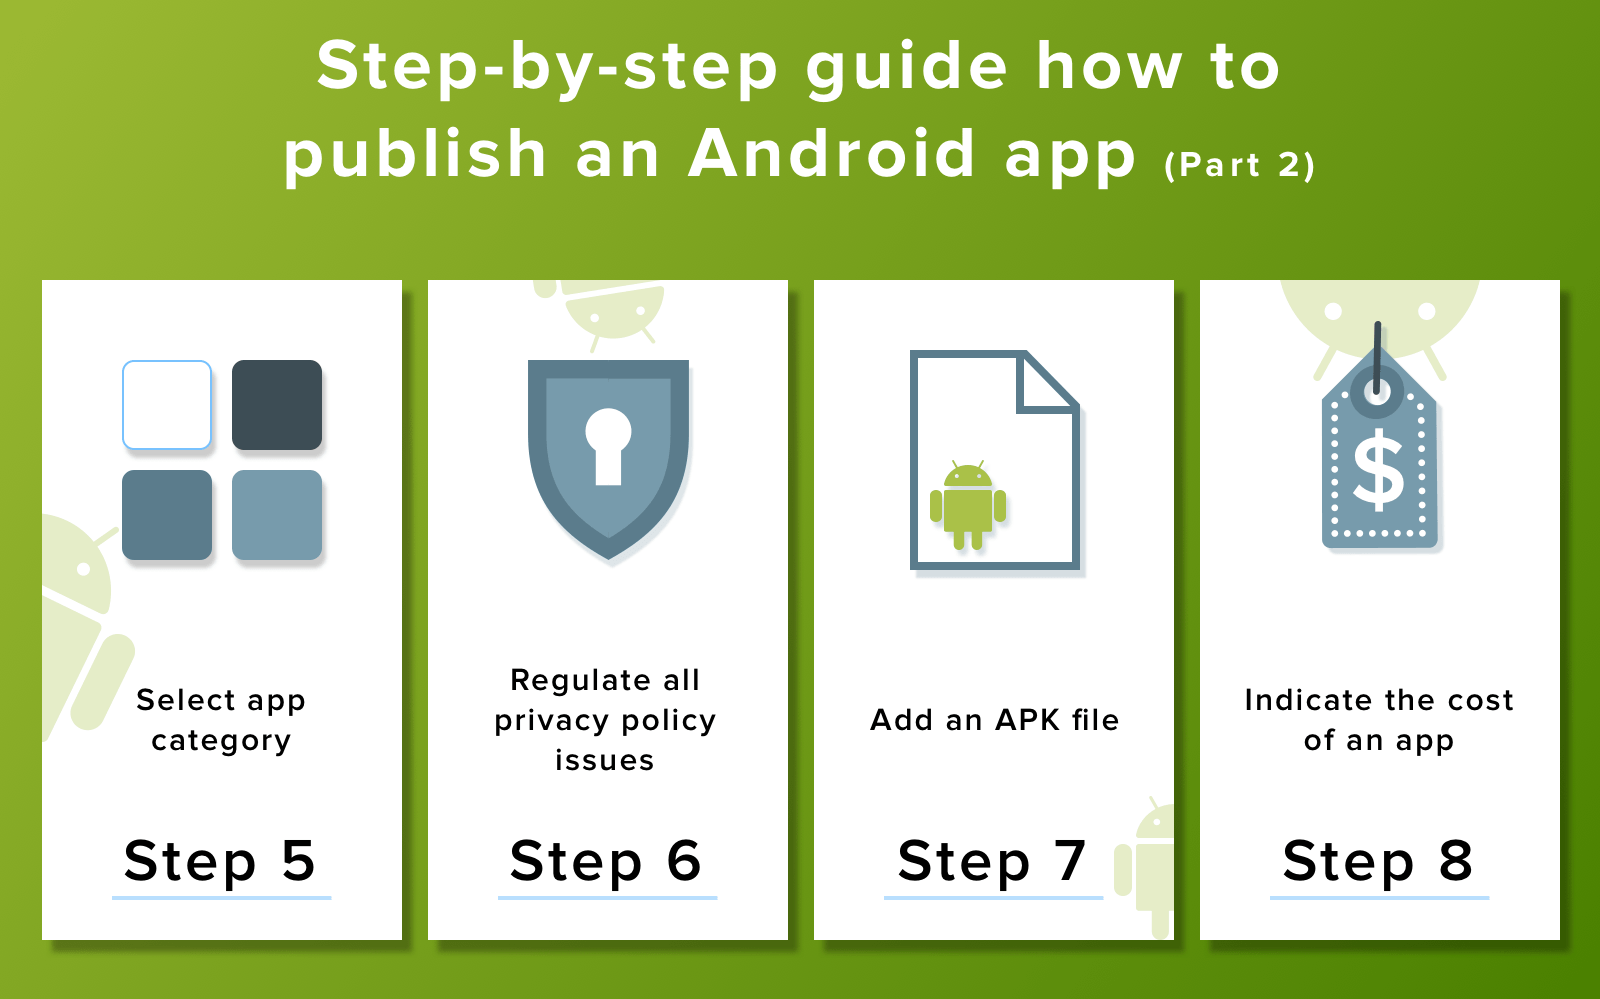 Android Apps by ONE STEP SOFTWARE on Google Play